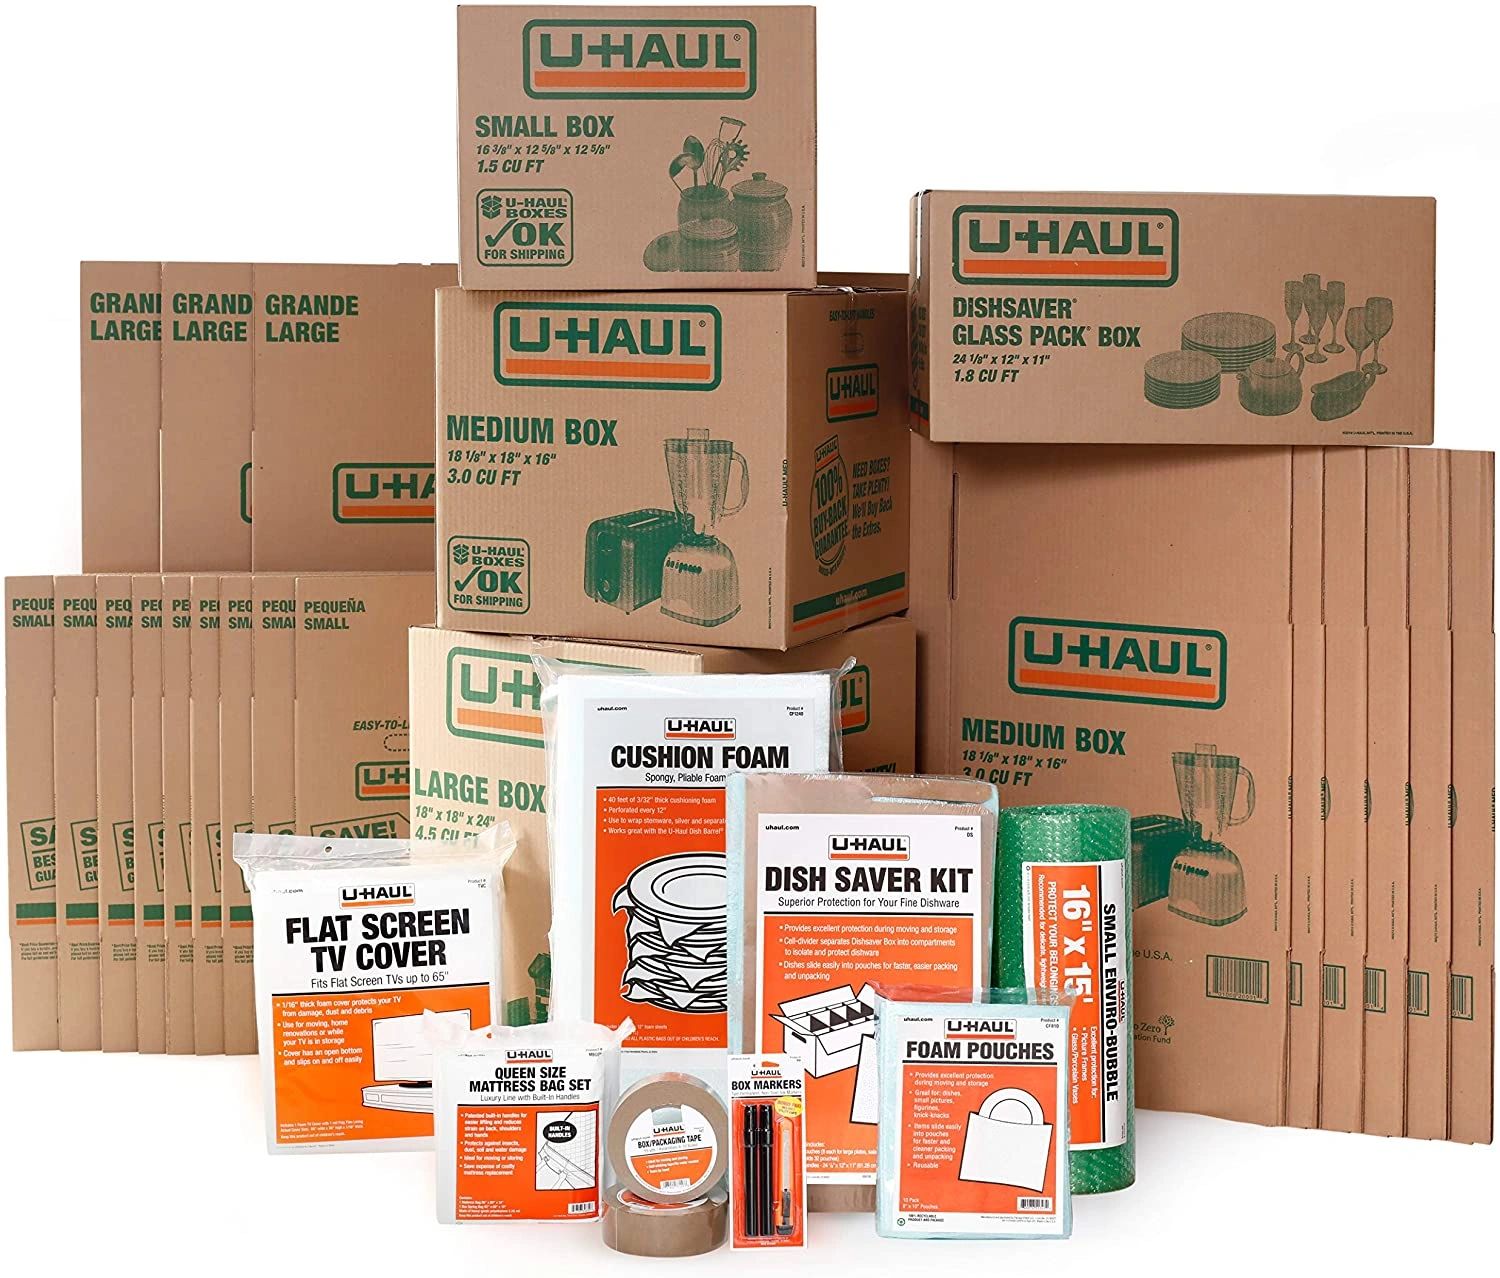 Uhaul supplies. Boxes, dish and glass pack kit, mattress and sofa covers. 